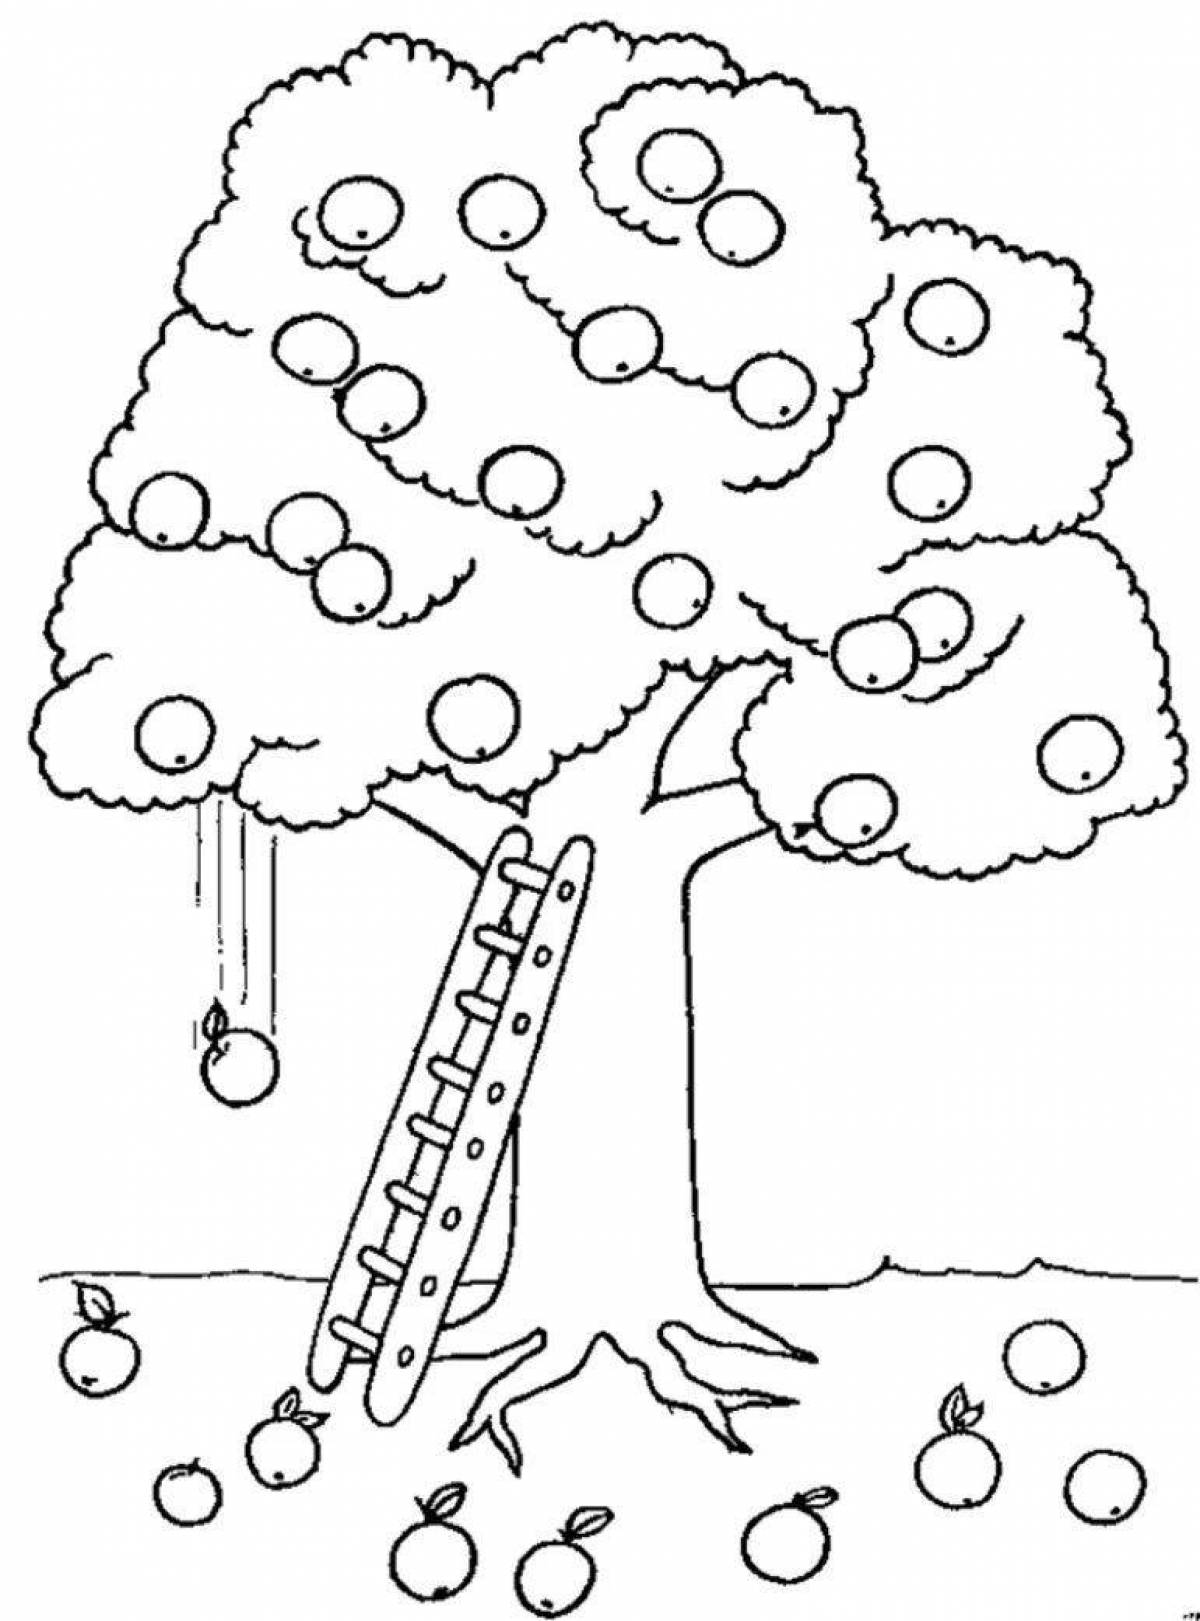 Colorful adorable tree coloring book for kids